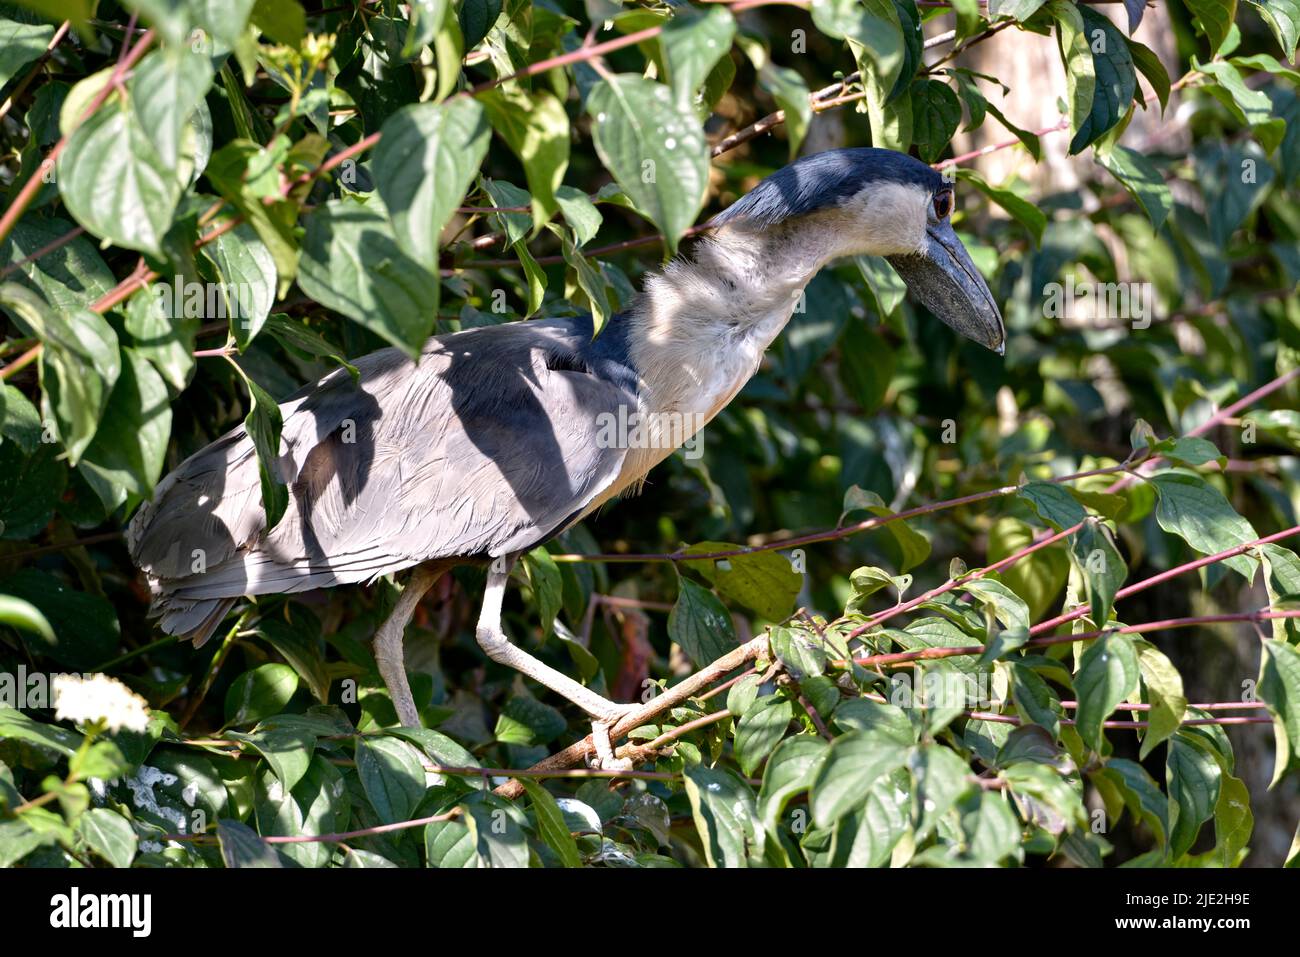 Closeup of boat-billed heron (Cochlearius cochlearius) in a tree and among leaves Stock Photo